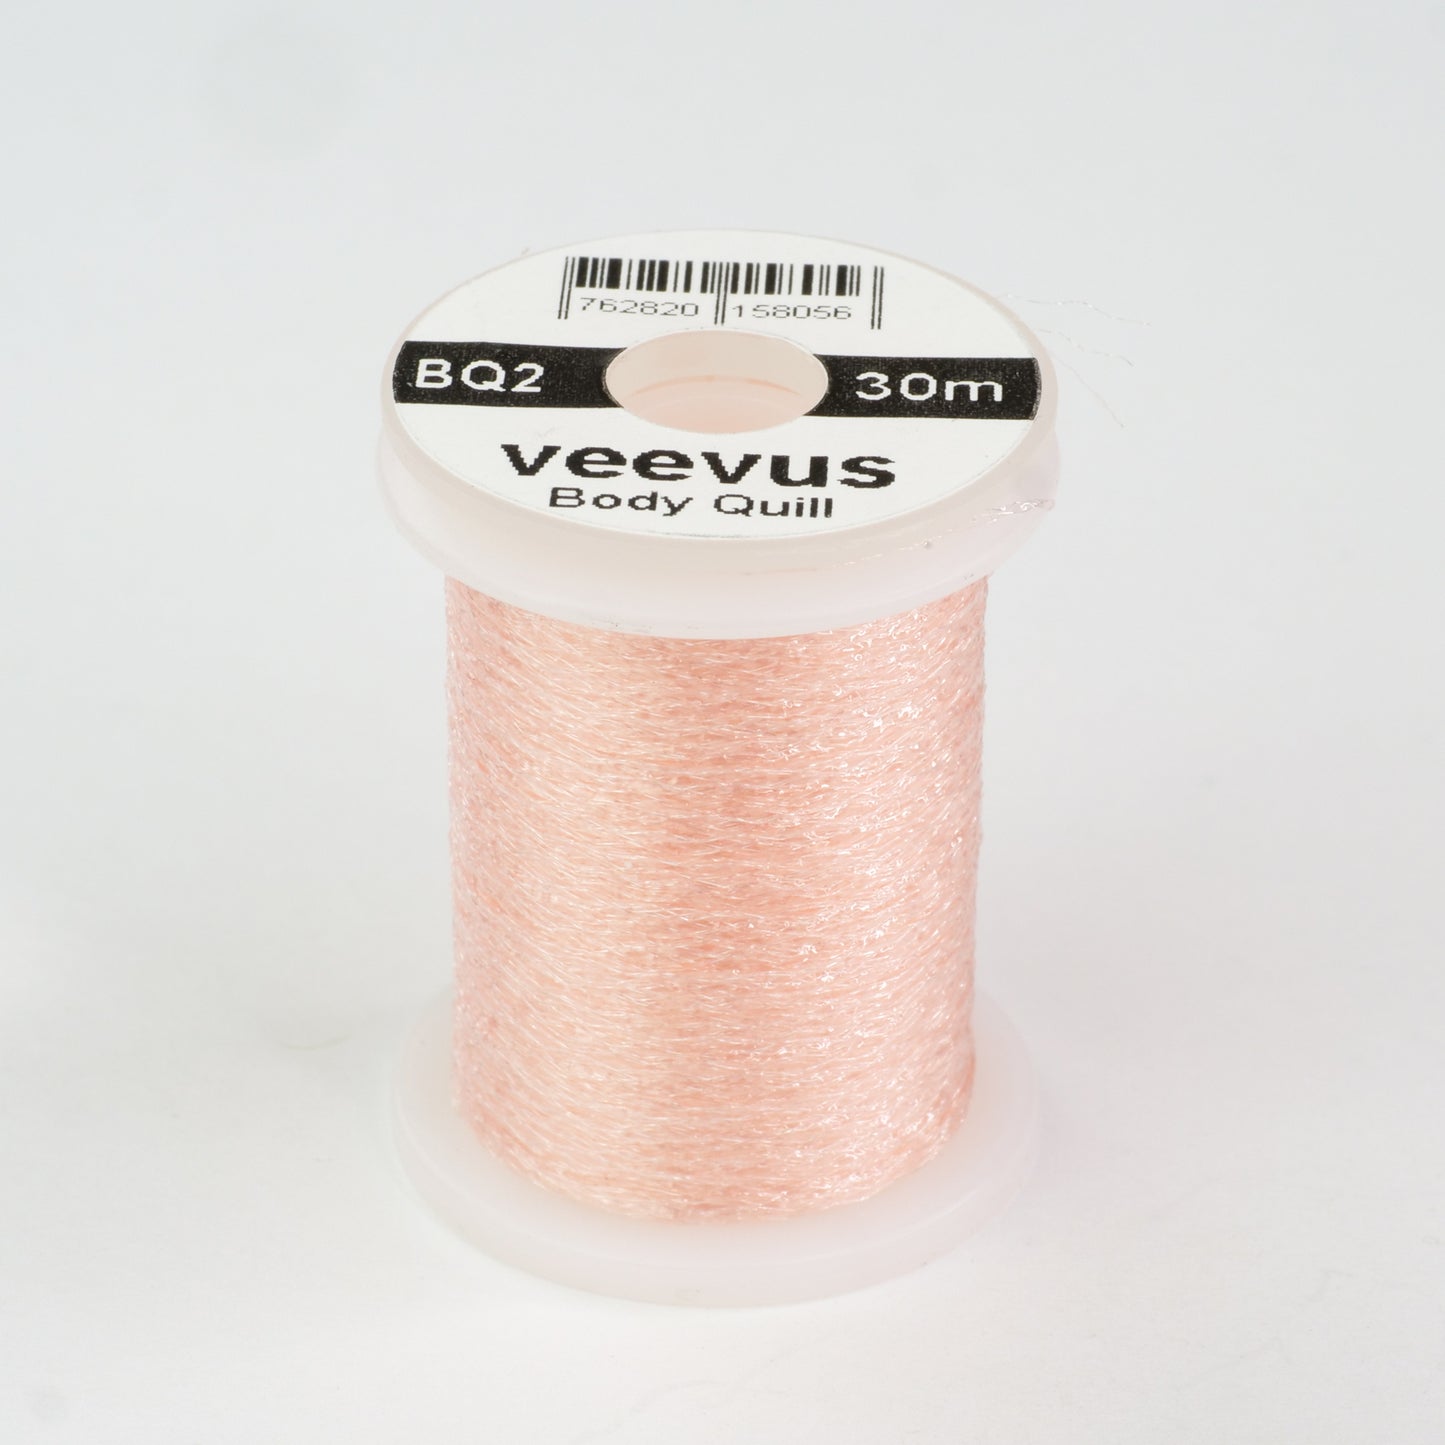 Veevus Body Quill – Tactical Fly Fisher